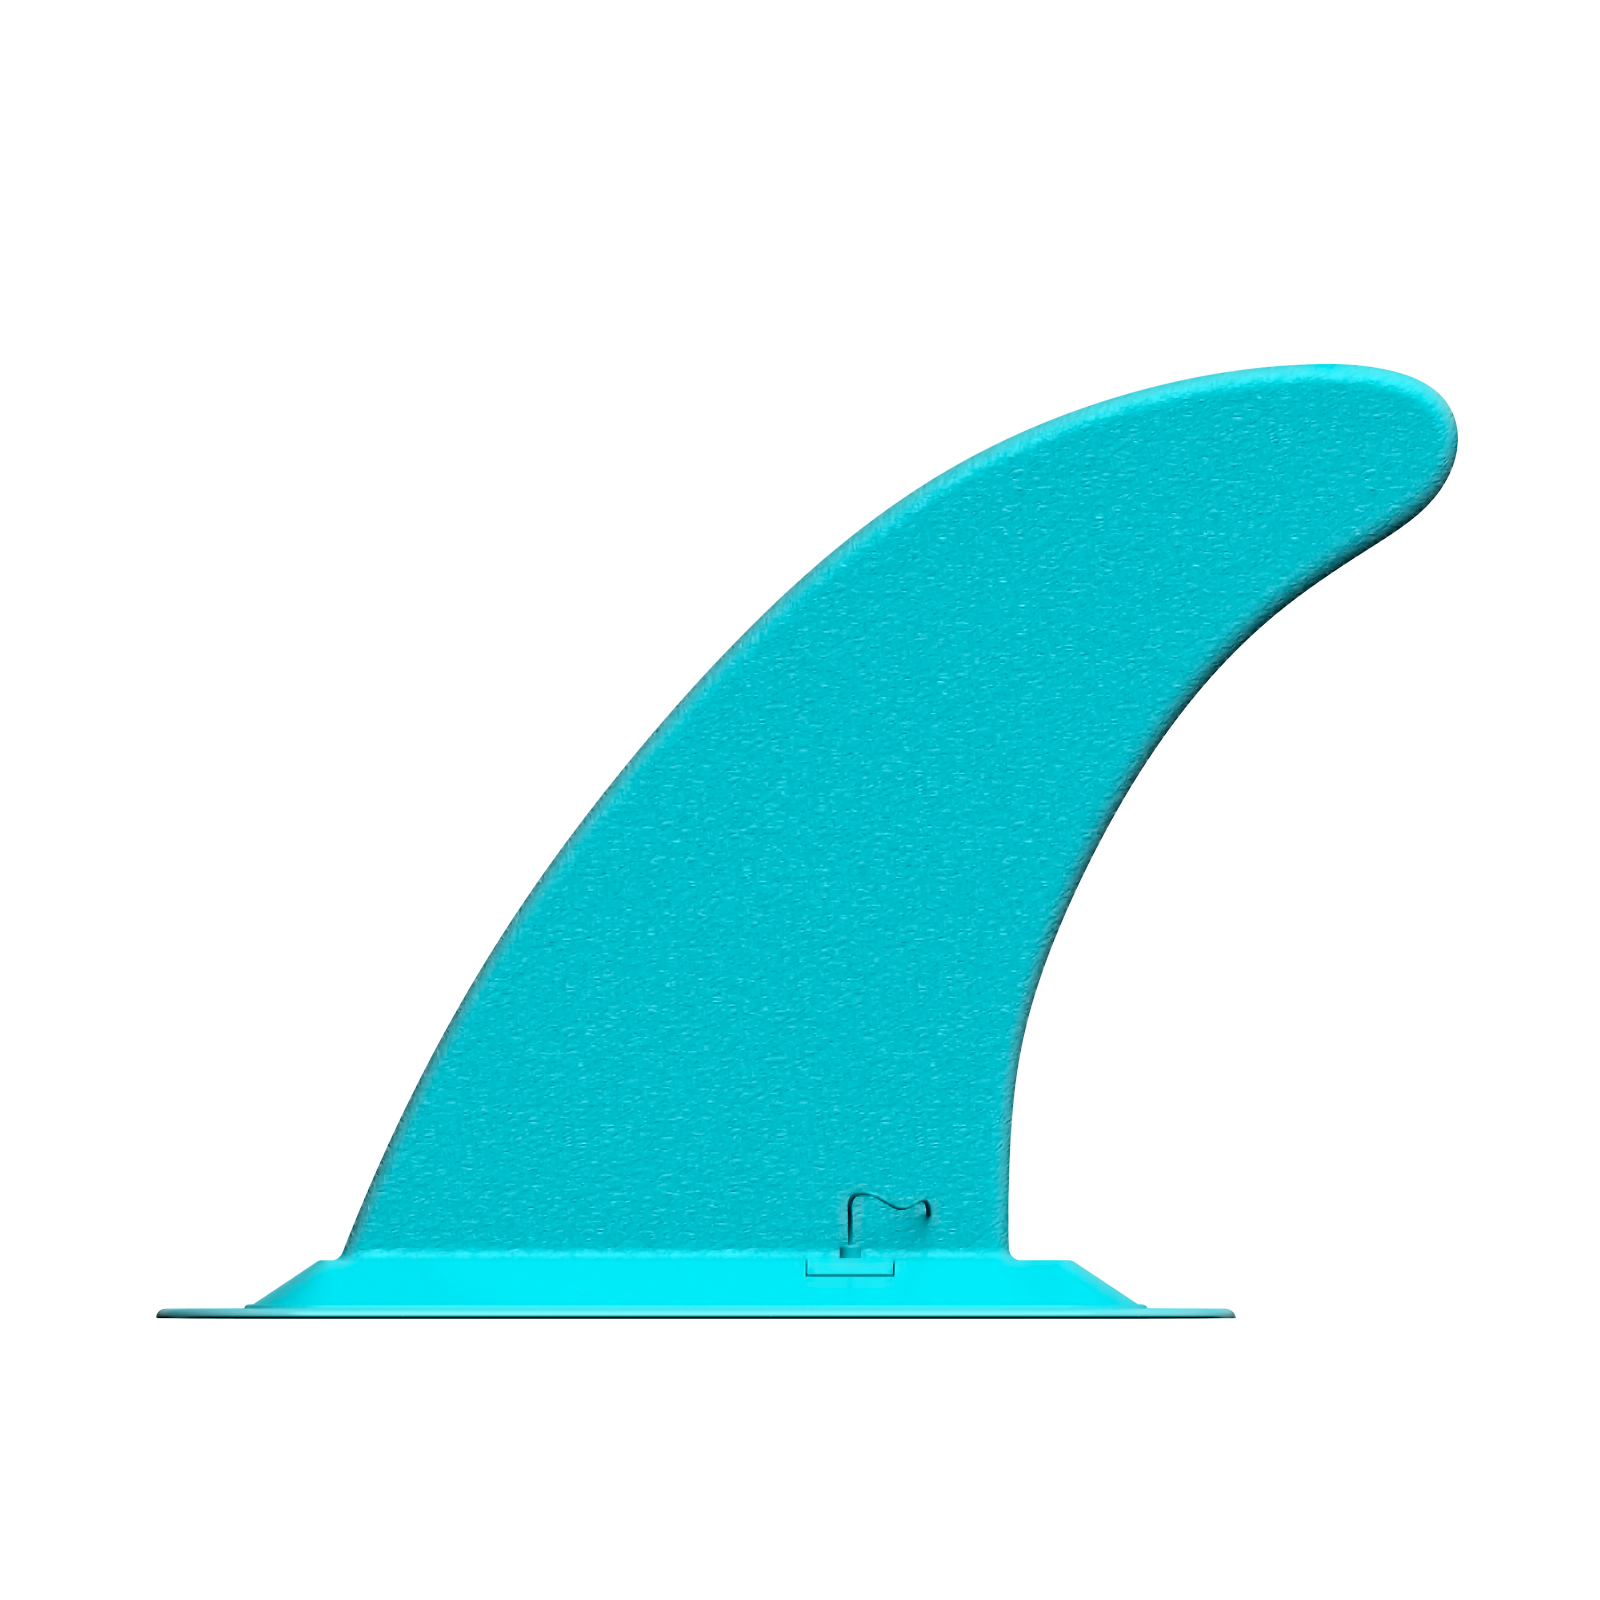 Wave SUP Fin | Detachable Fin in Aqua for Tourer, Cruiser, Woody Paddle Boards - Wave Spas Inflatable, foam Hot Tubs